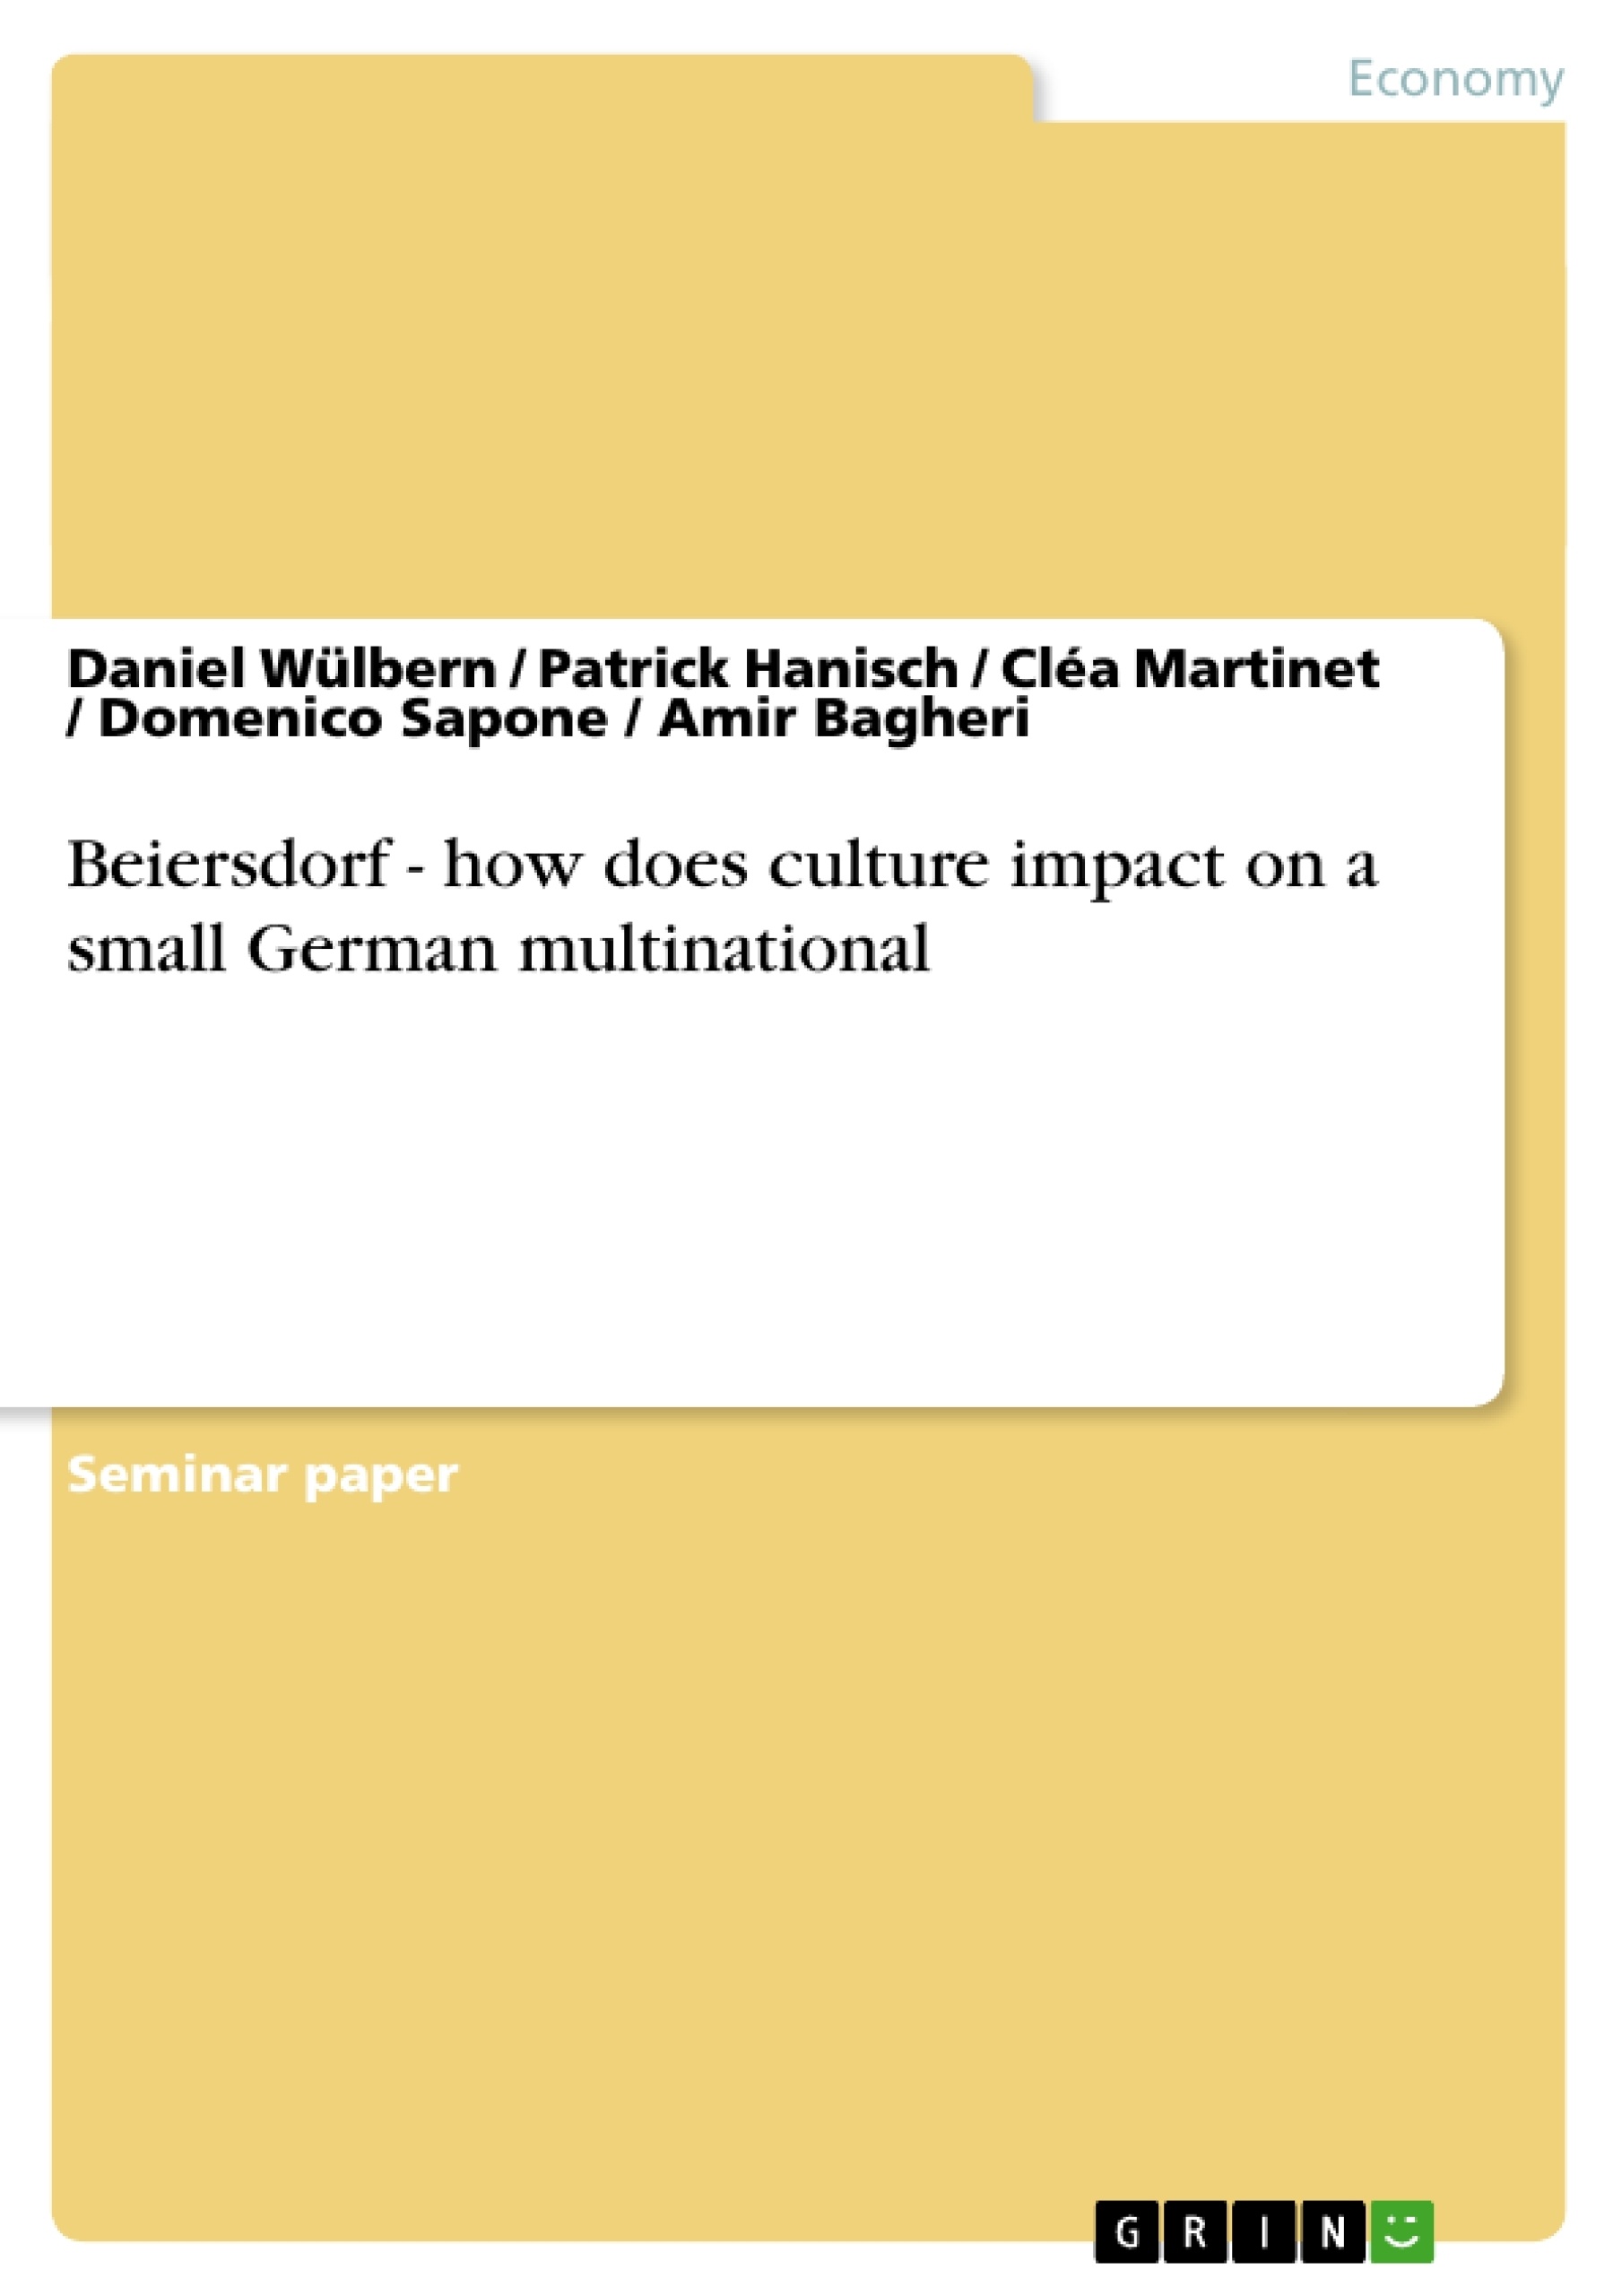 Título: Beiersdorf - how does culture impact on a small German multinational